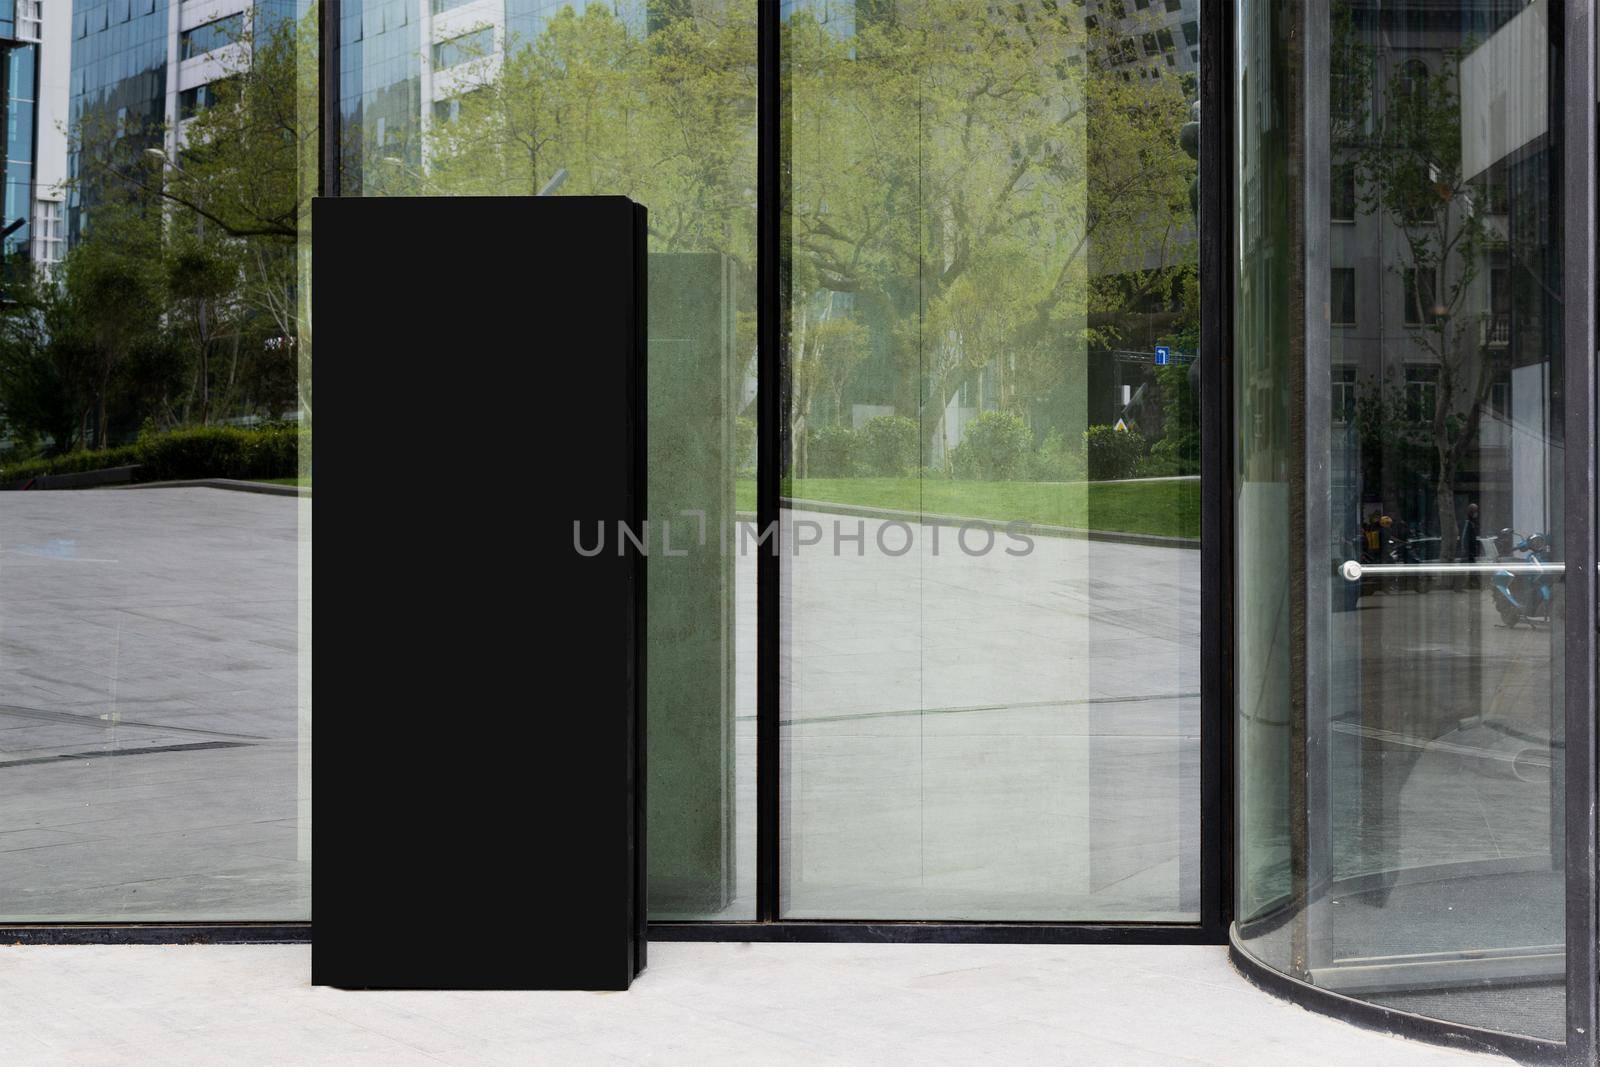 mockup of a street sign for a restaurant or hotel near large glass doors. Signboard for business building, hotel, restaurant, residential complex. Large glass showcase reflecting the city